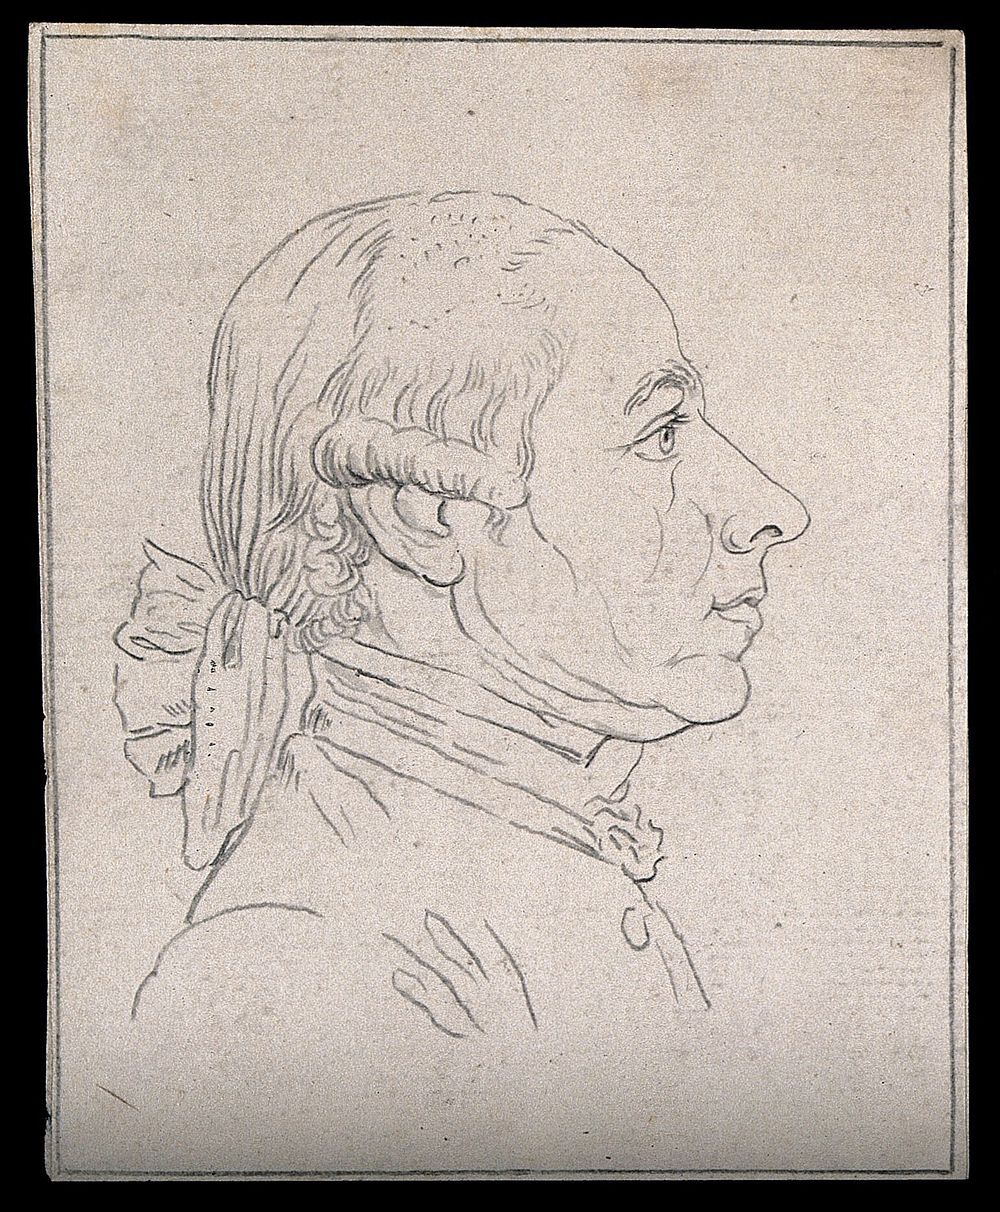 A man with a nose indicating reflectiveness (according to Lavater). Drawing, c. 1794.